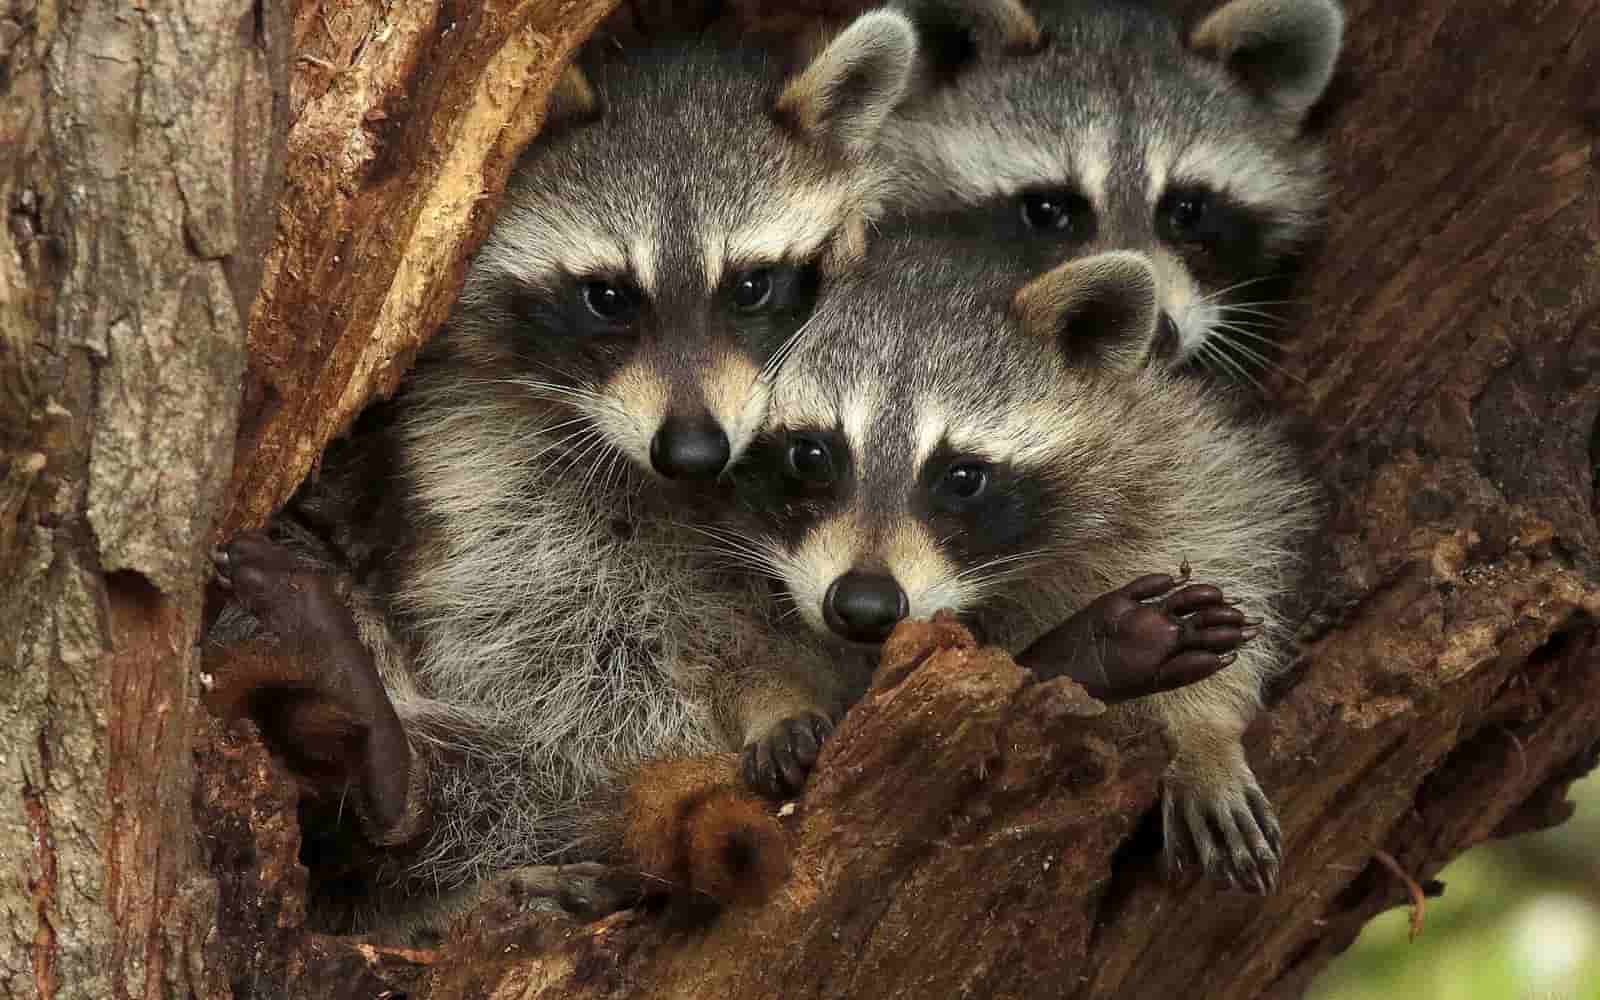 How long does a raccoon live?